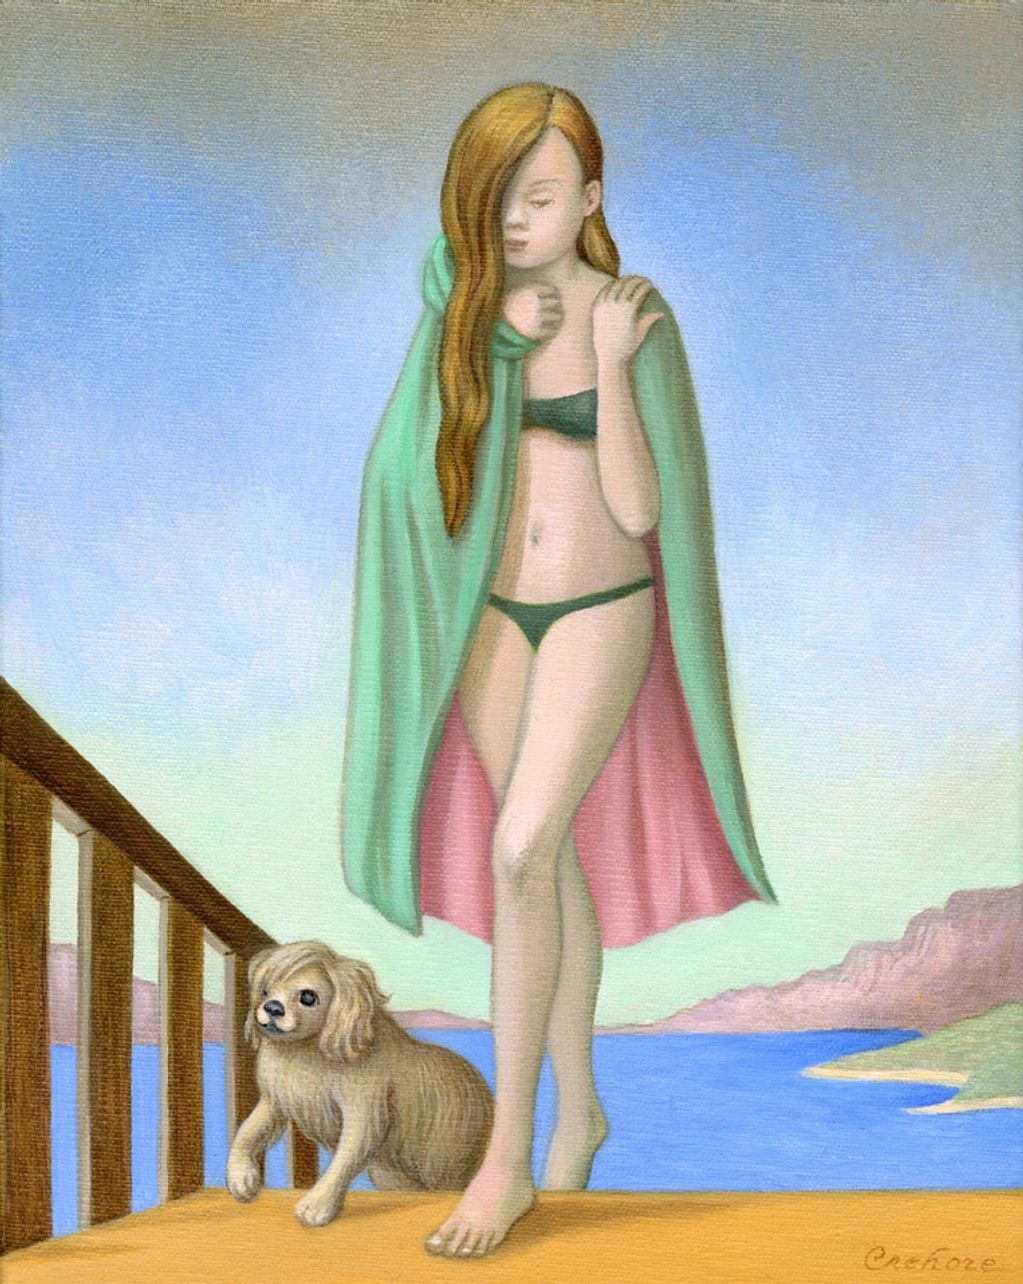 Long haired girl in cape and her dog climbing stairs at the beach